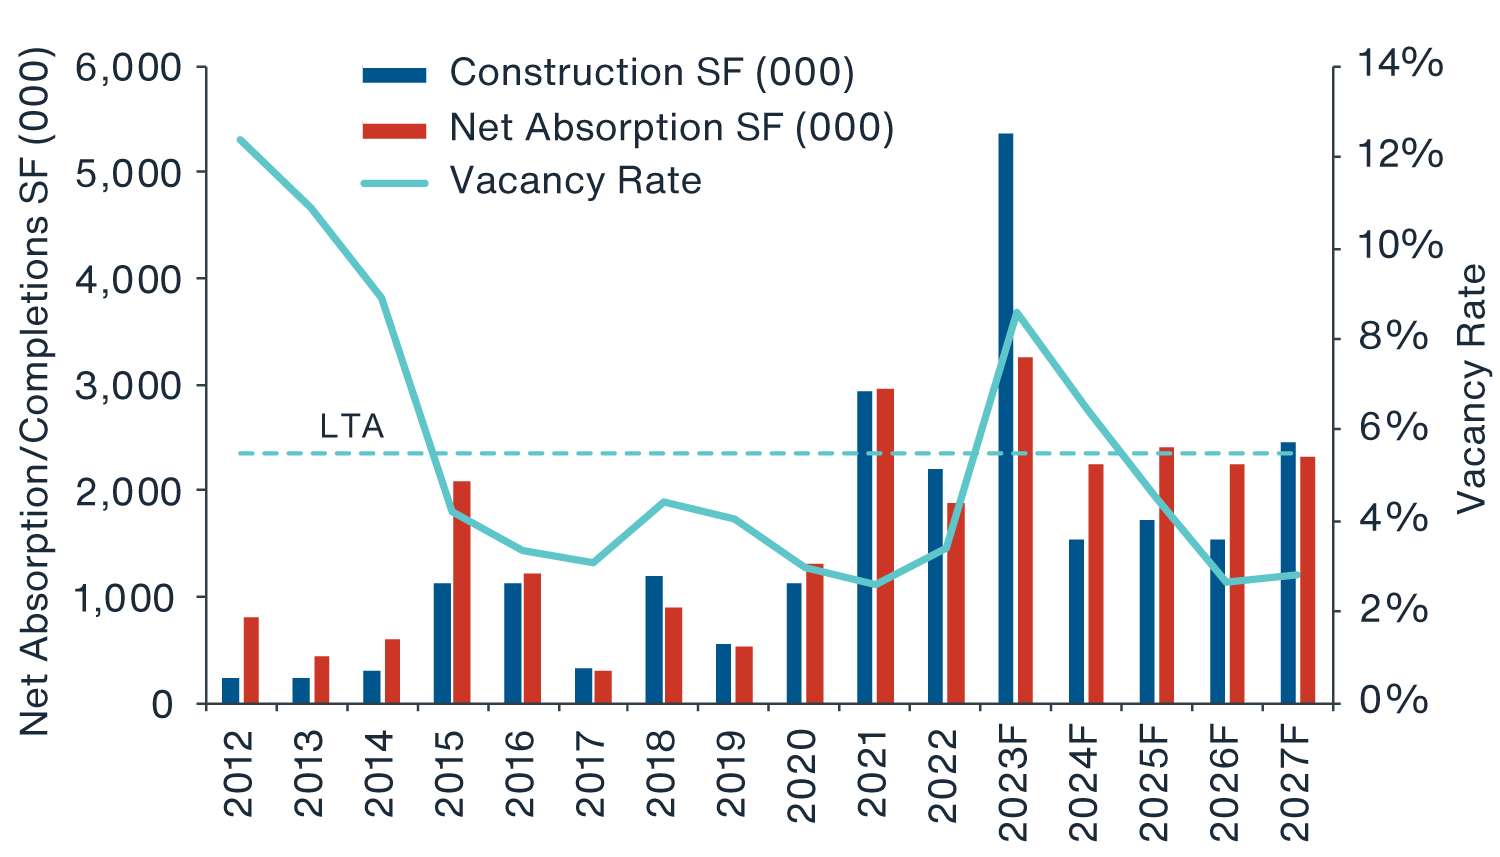 Chart showing vacancy is expected to rise in the near term, peak in late 2023/early 2024, and then reverse trend from 2024-2026